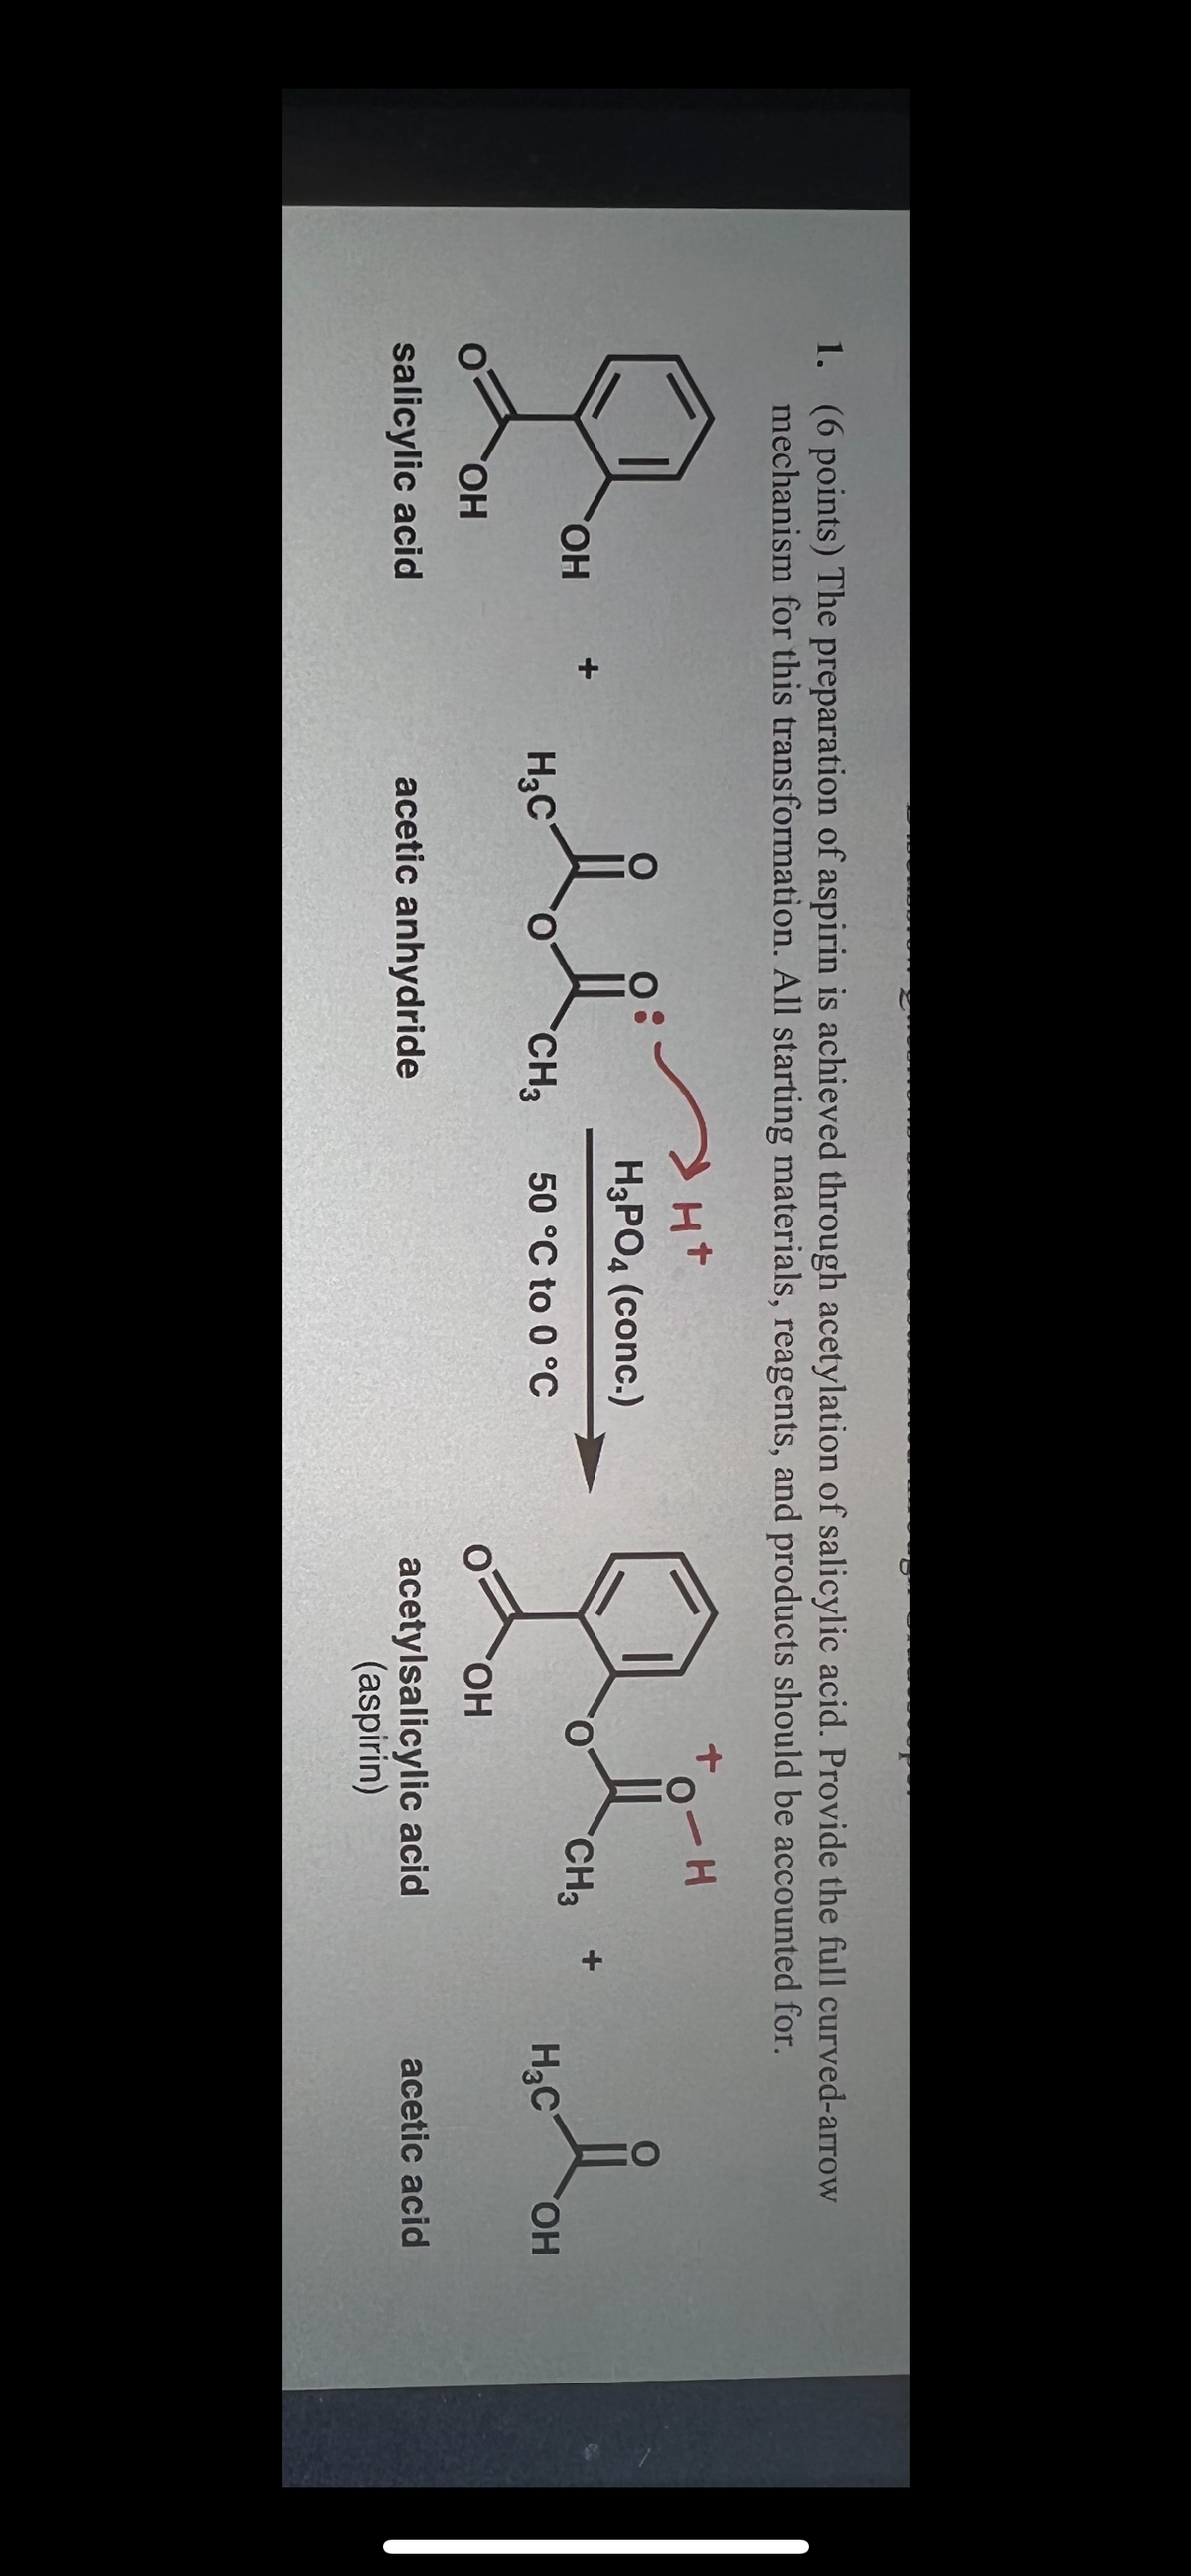 1. (6 points) The preparation of aspirin is achieved through acetylation of salicylic acid. Provide the full curved-arrow
mechanism for this transformation. All starting materials, reagents, and products should be accounted for.
+
J. d
OH
H₂C
OH
salicylic acid
CH3
acetic anhydride
> H+
H3PO4 (conc.)
50 °C to 0 °C
-H
gt.
CH3
OH
acetylsalicylic acid
(aspirin)
i
H₂C
OH
acetic acid